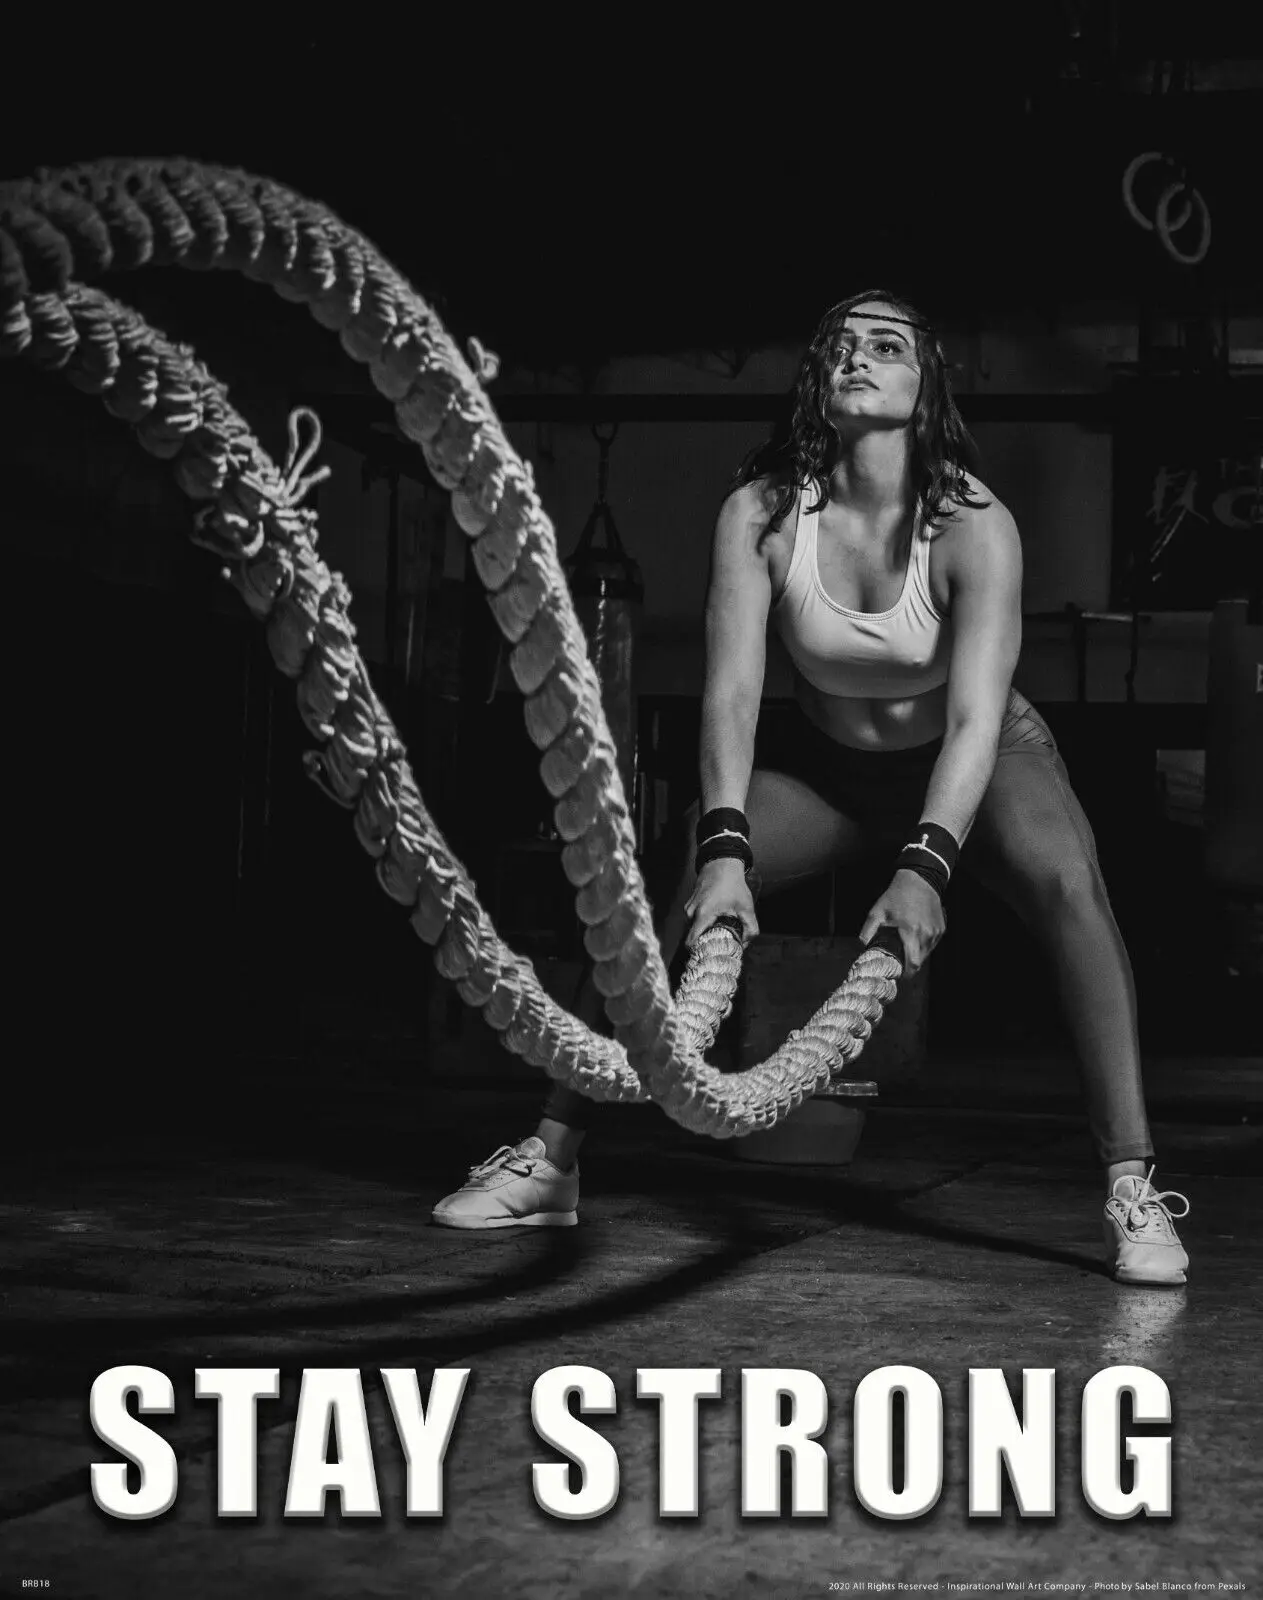 Workout Motivational Women's Fitness Gym Print Art Canvas Poster For Living Room Decor Home Wall Picture